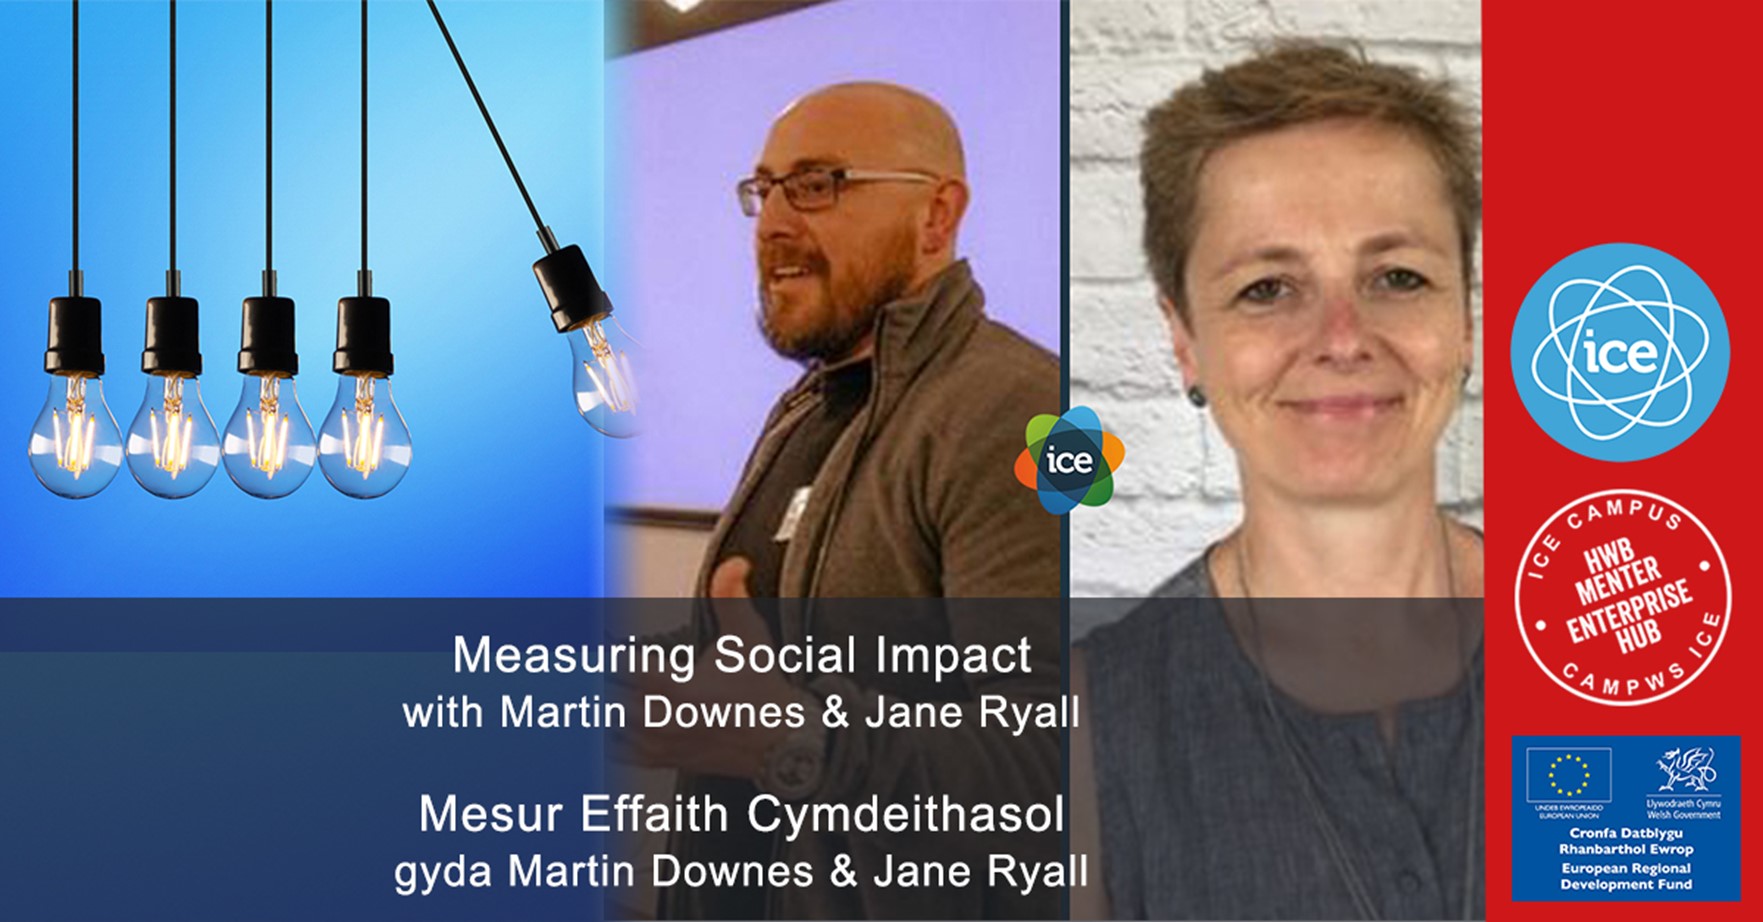 Martin Downes and Jane Ryall - Measuring Social Impact Workshop